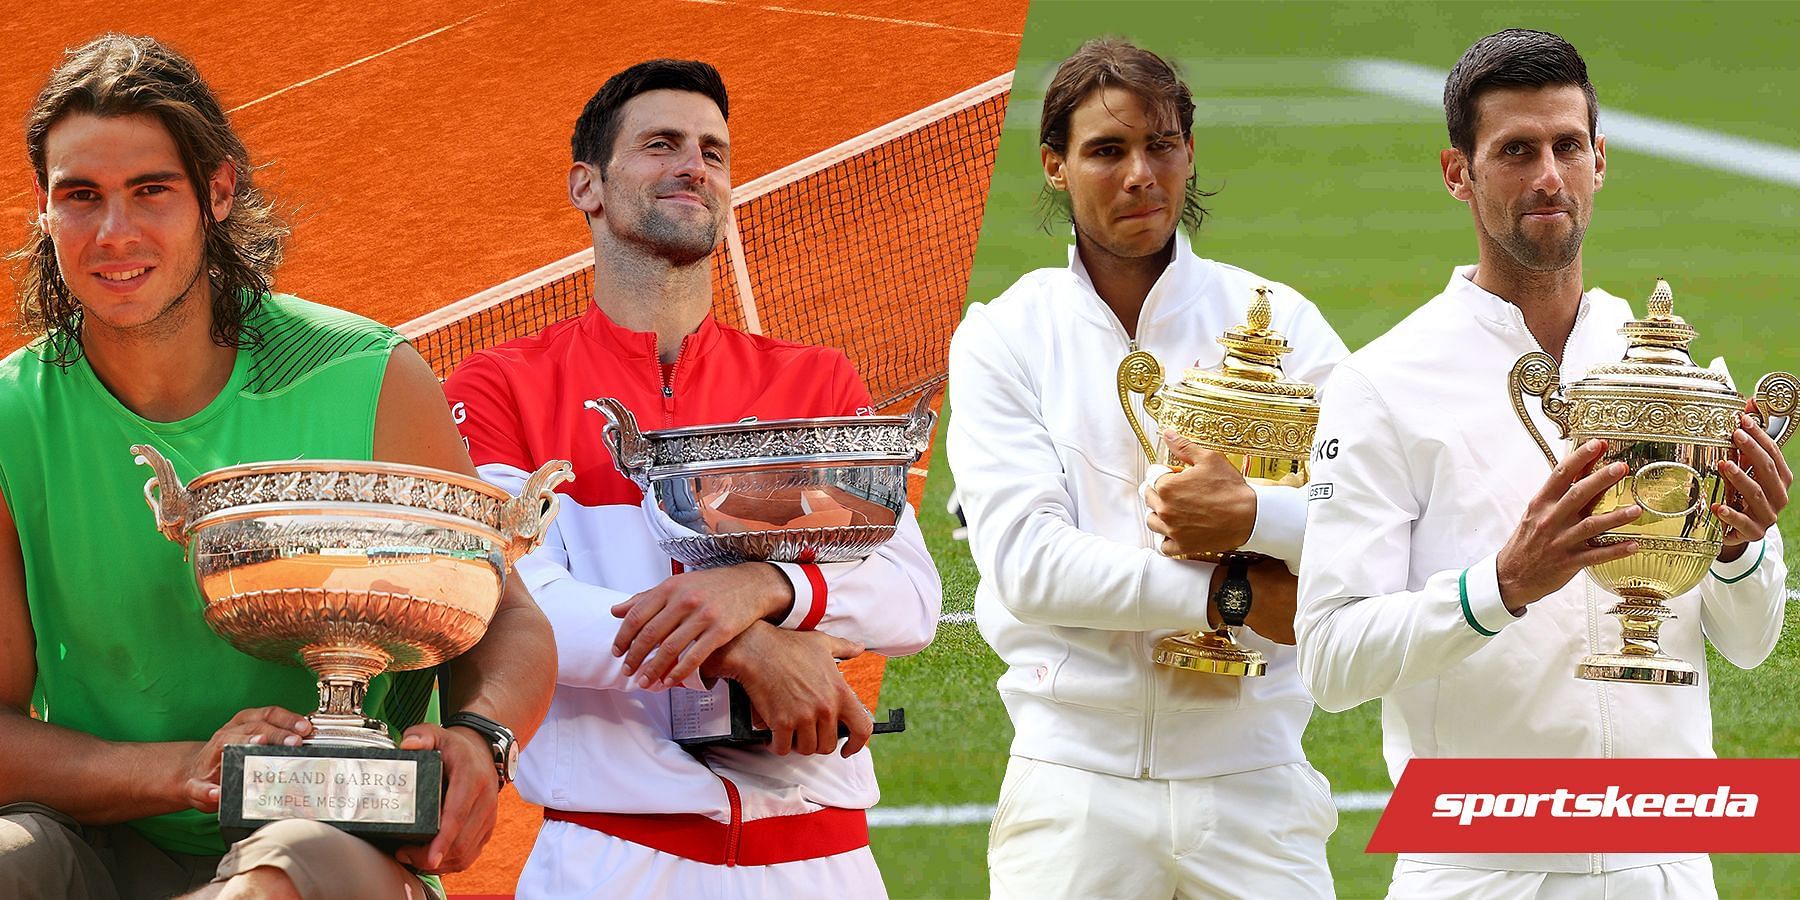 Rafael Nadal and Novak Djokovic with their French Open and Wimbledon trophies.